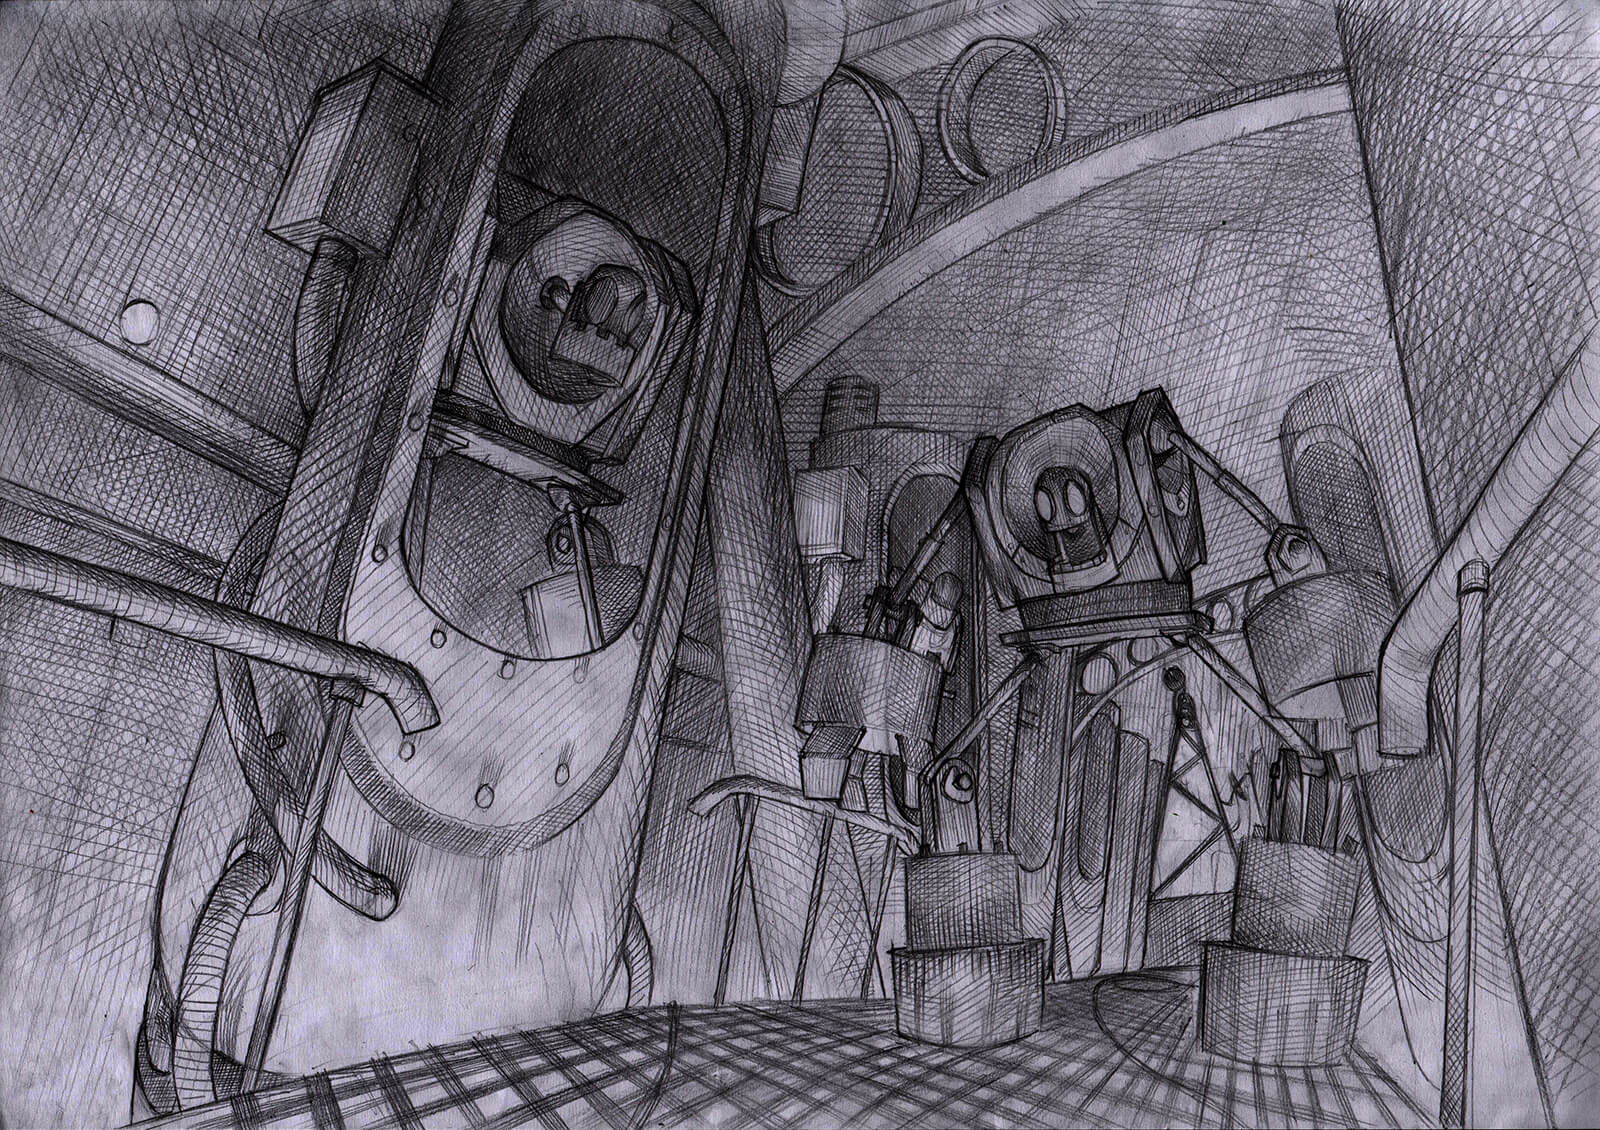 Black-and-white concept sketch for the film Core, depicting ominous metallic robots in a corridor